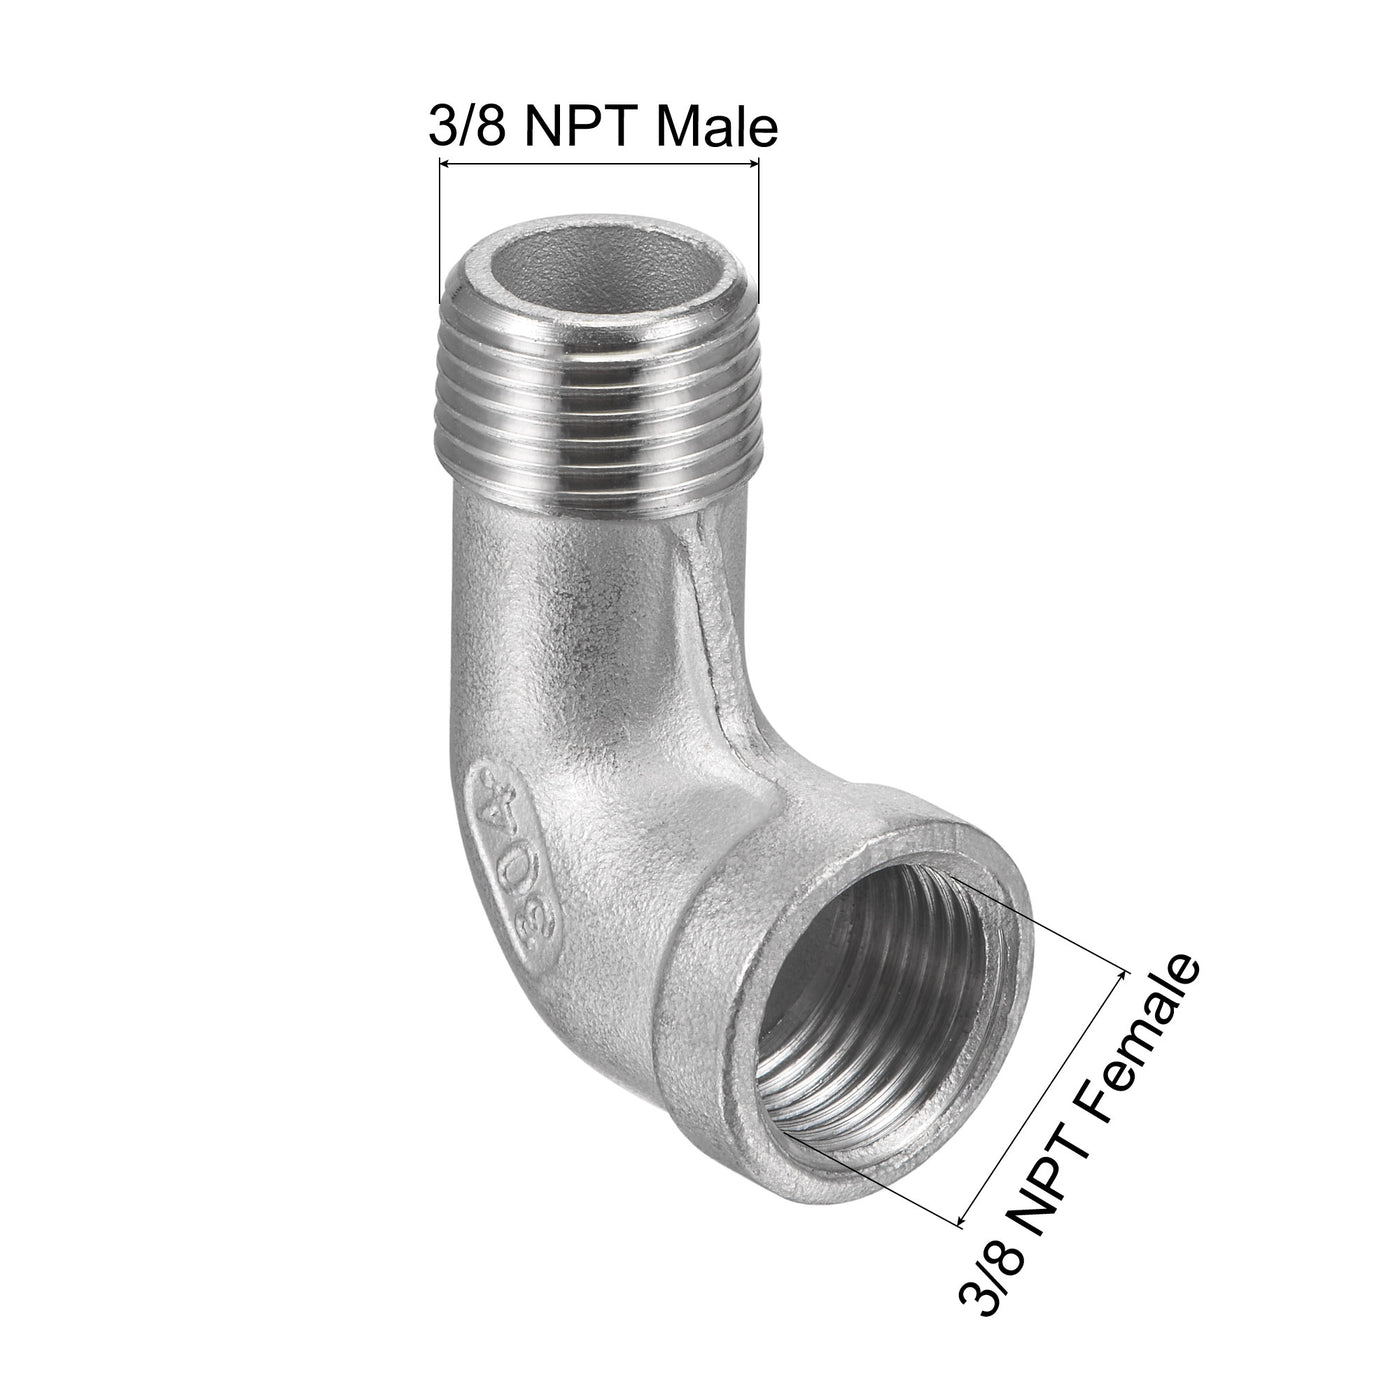 Uxcell Uxcell Pipe Fitting Elbow 1/4 NPT Male to Female Thread Hose Connector Adapter, 304 Stainless Steel Pack of 2